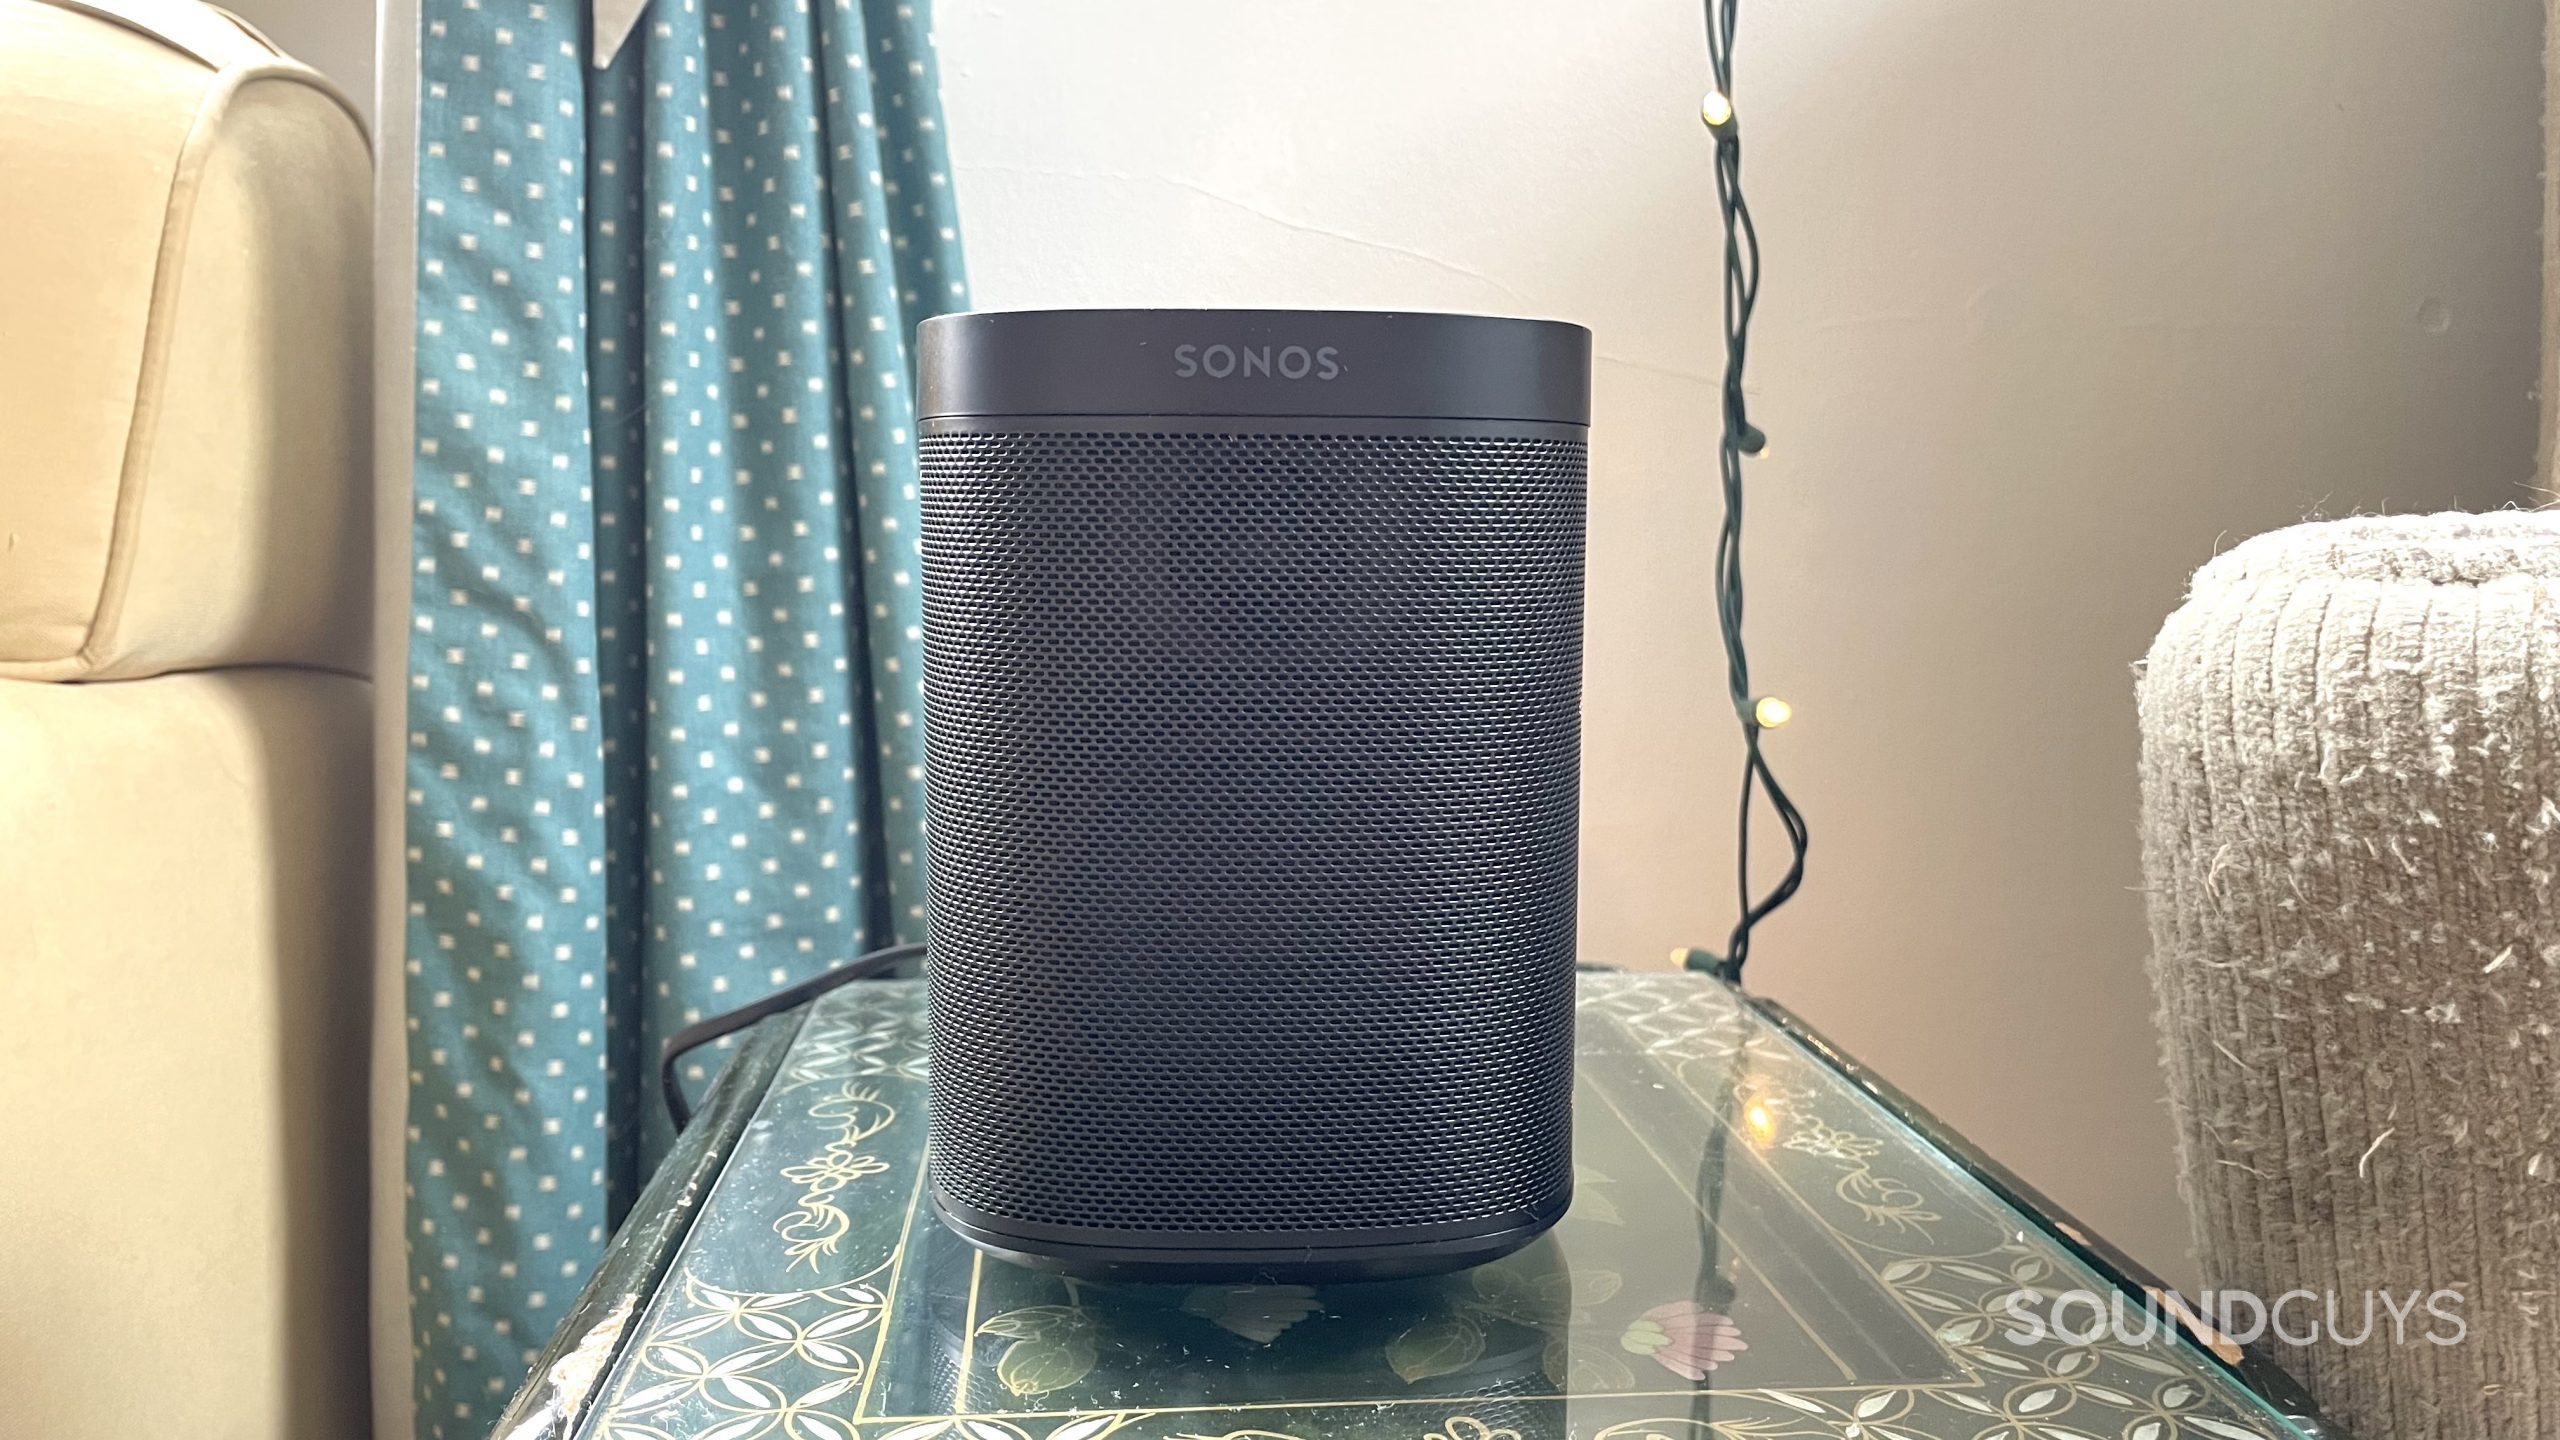 Sonos One is the speaker to beat for those who want great sound and smarts